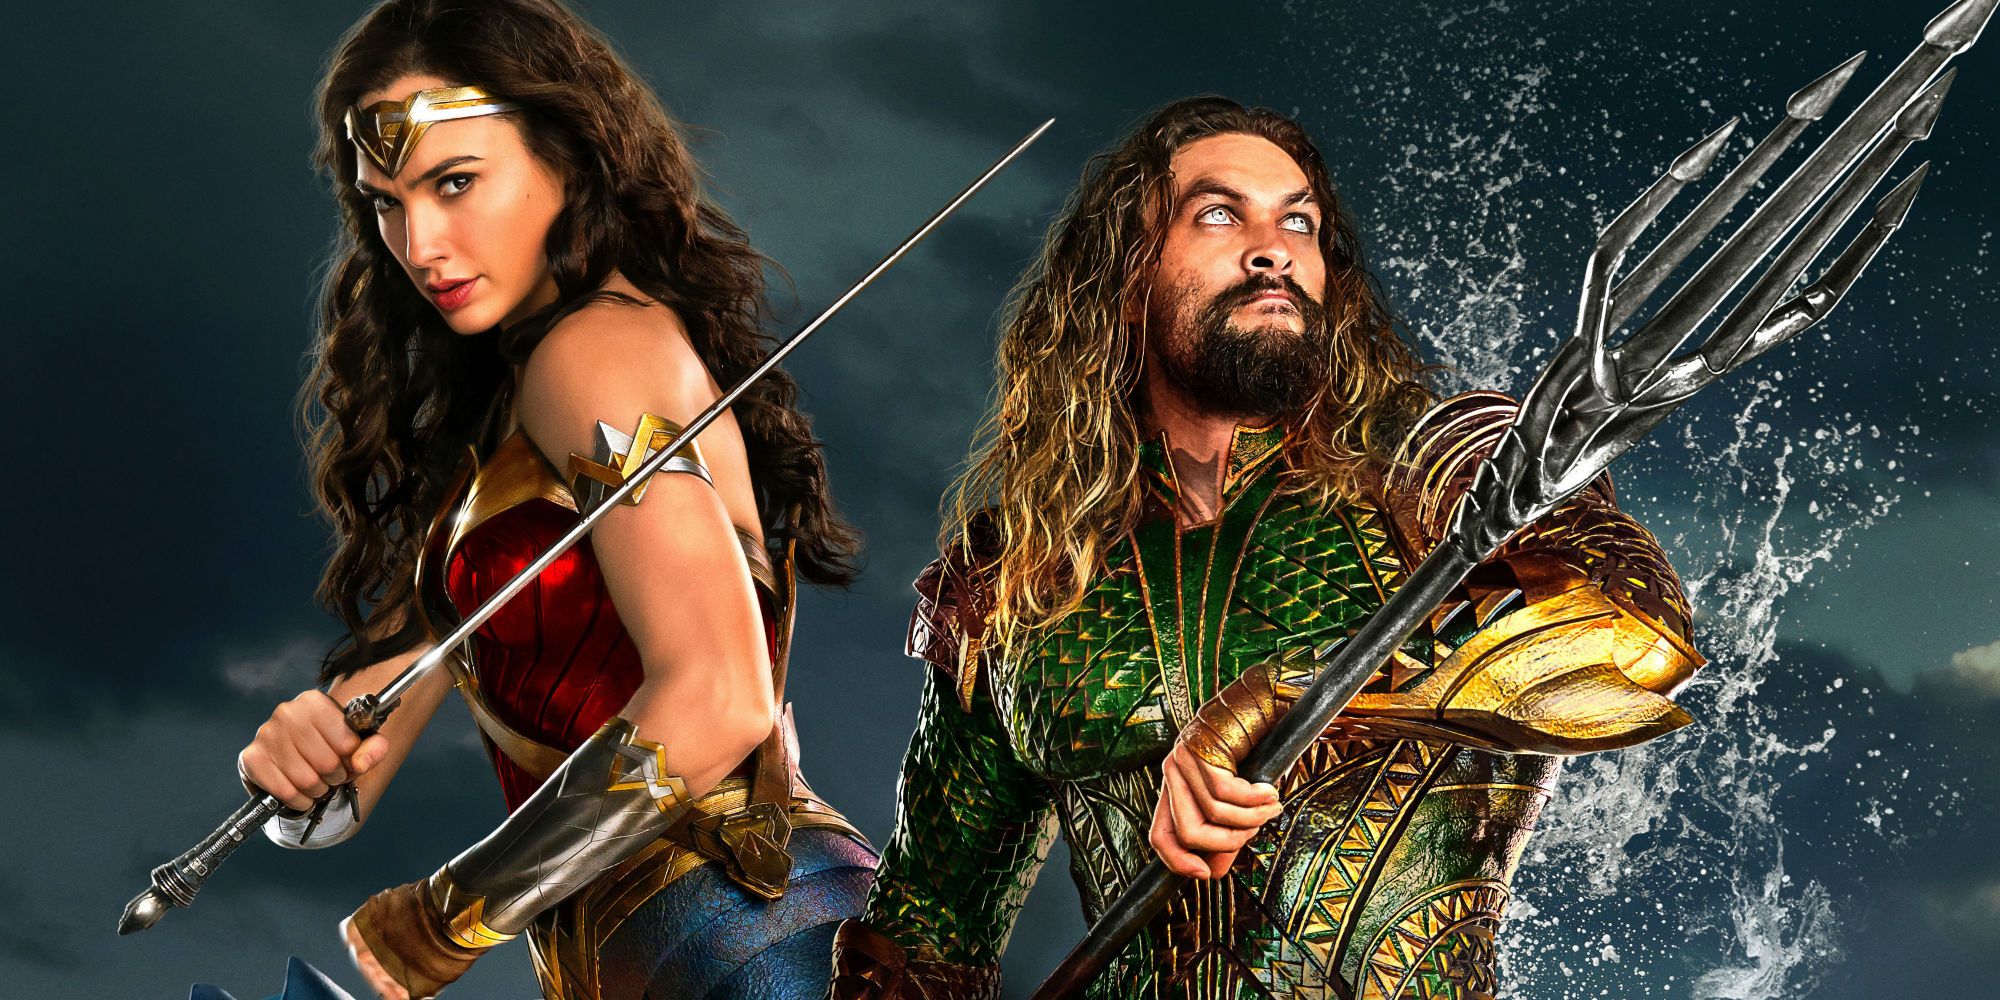 Wonder Woman and Aquaman from the DCEU